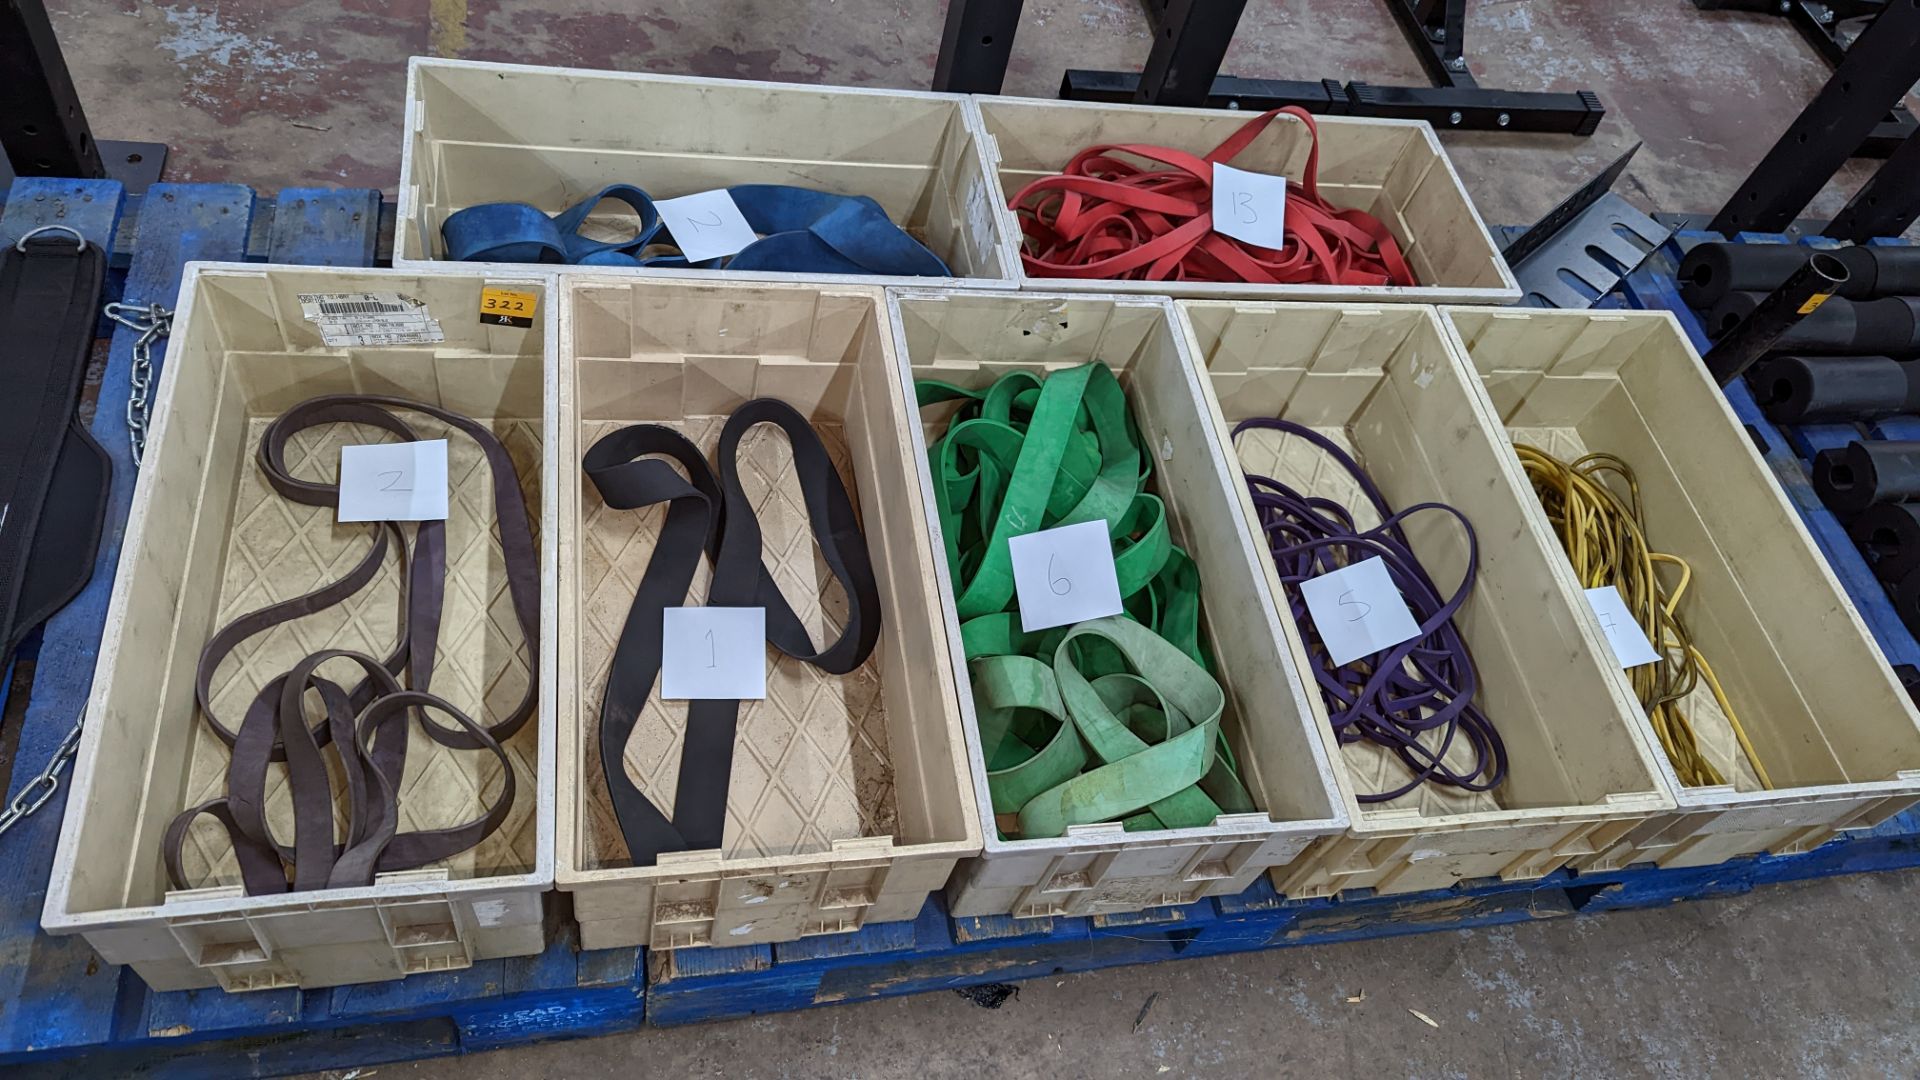 Large quantity of rubber resistance bands comprising the contents of seven crates, each crate holdin